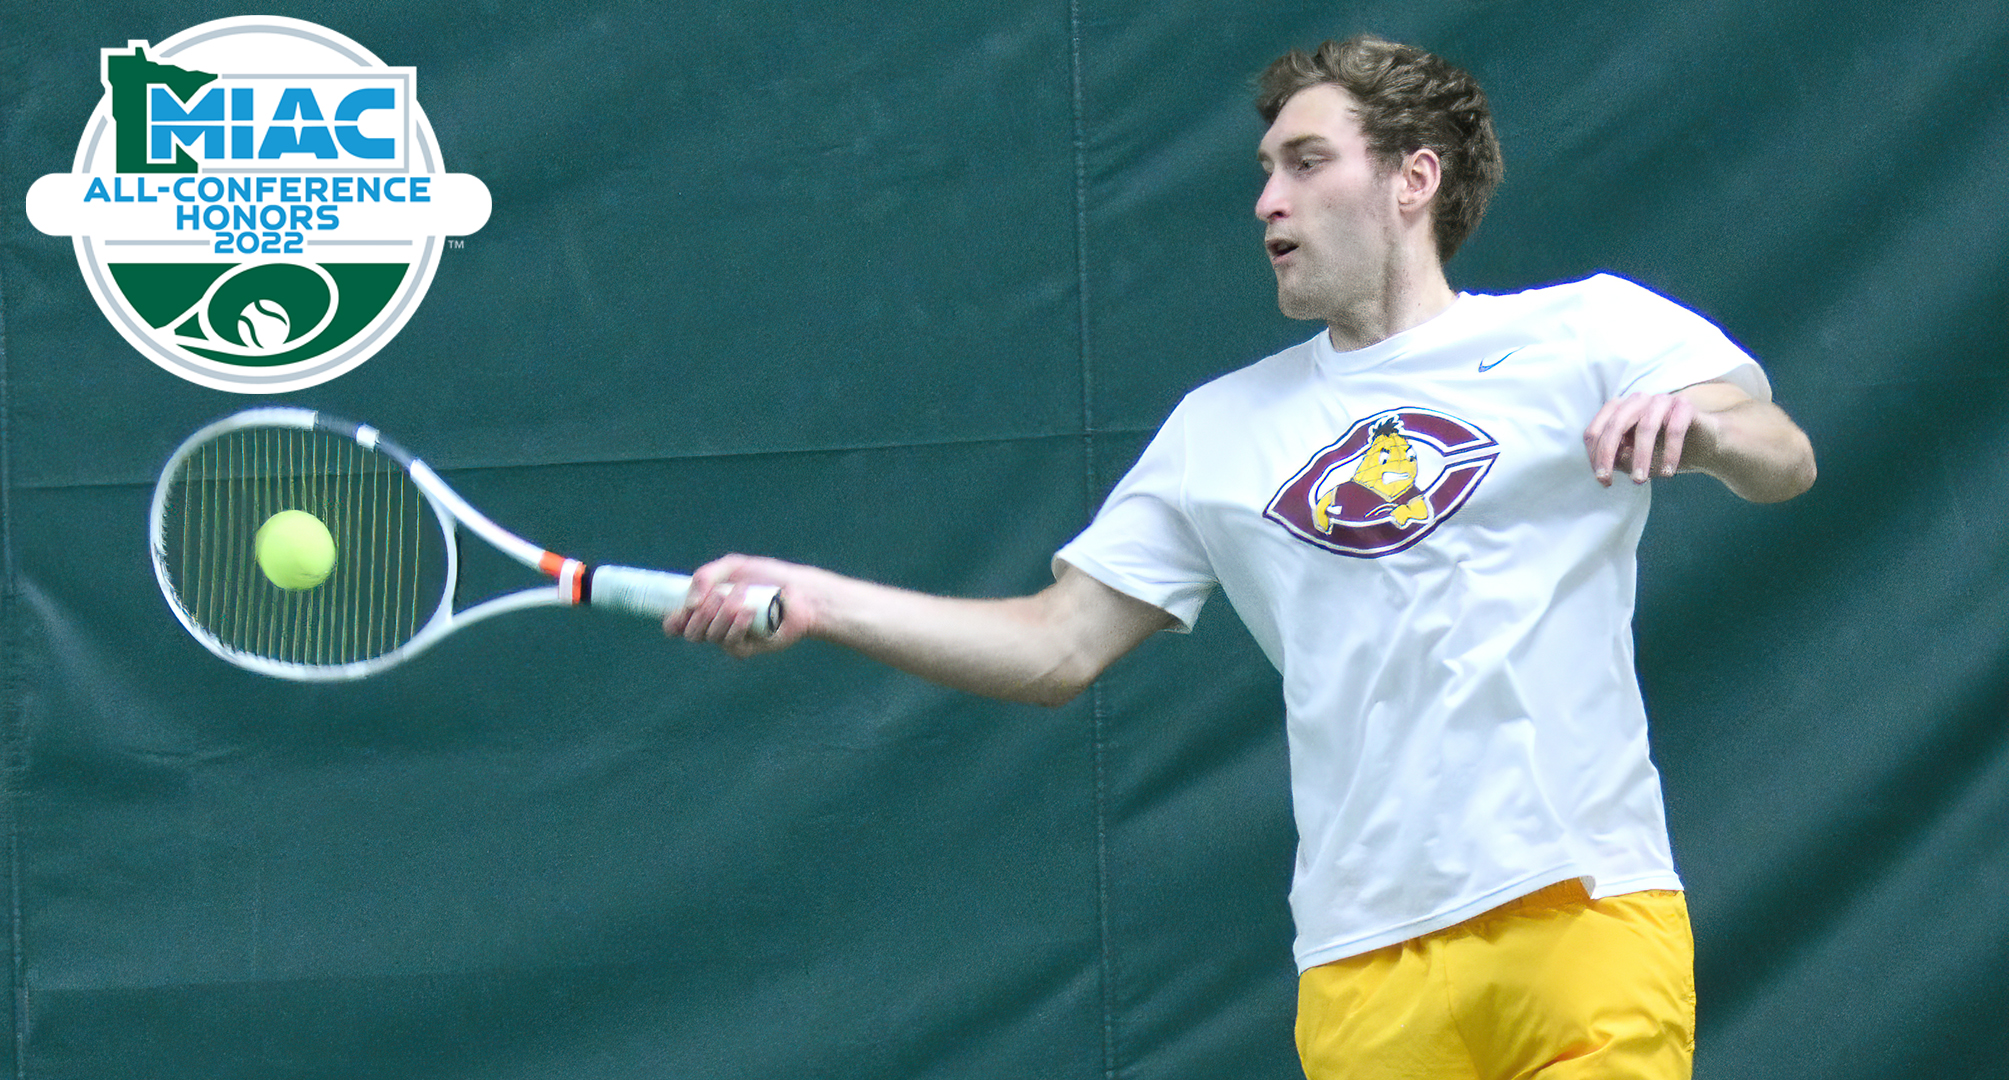 Senior Jake Peters was named to the MIAC All-Conference Honorable Mention Team in singles play for the 2022 season.